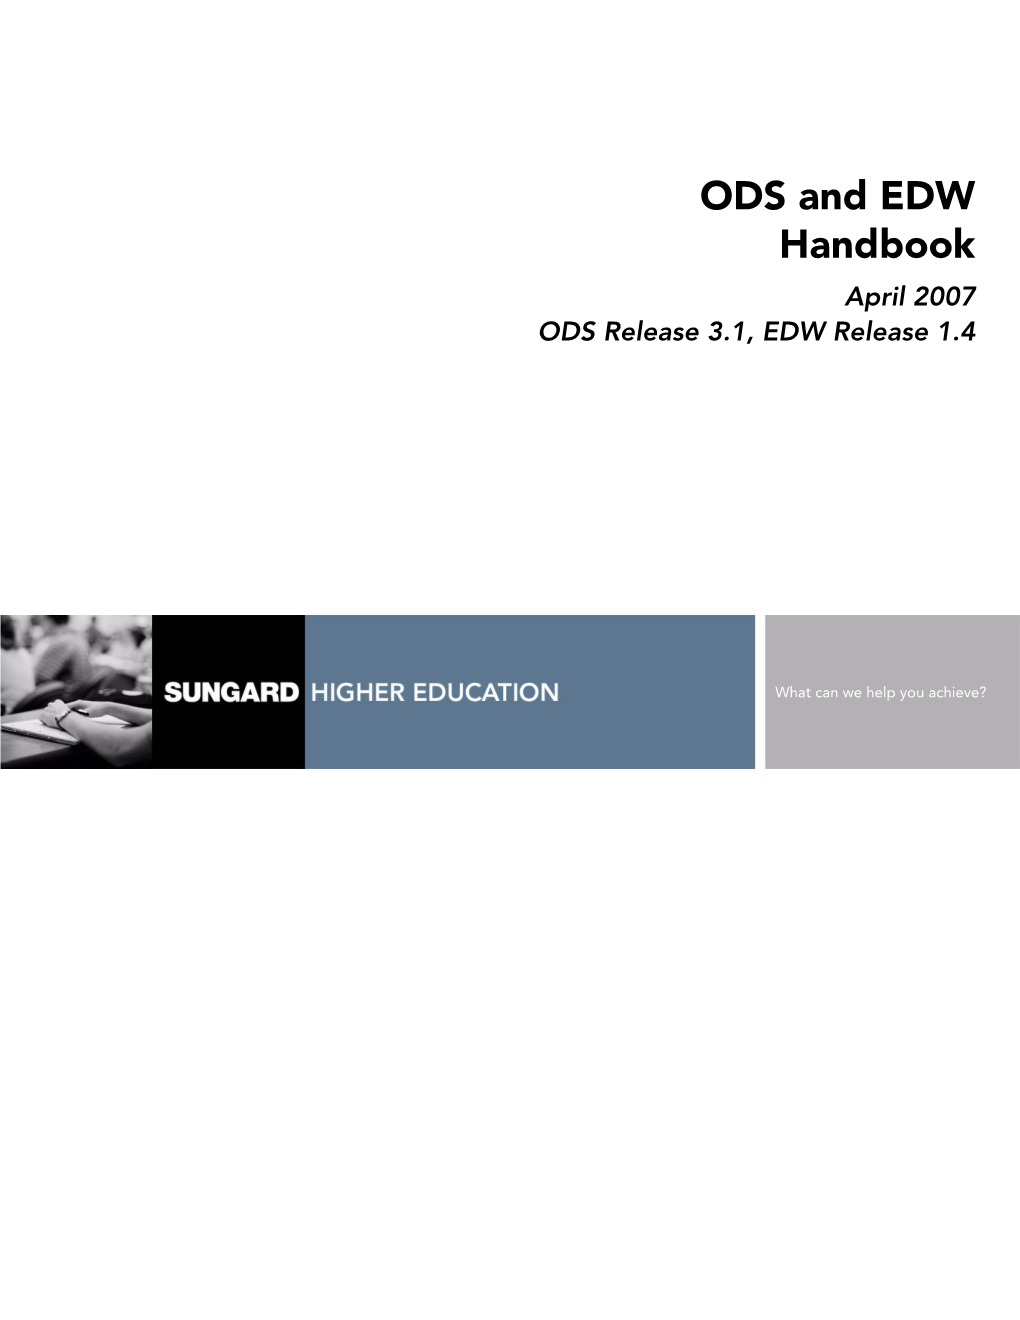 ODS and EDW Handbook April 2007 ODS Release 3.1, EDW Release 1.4